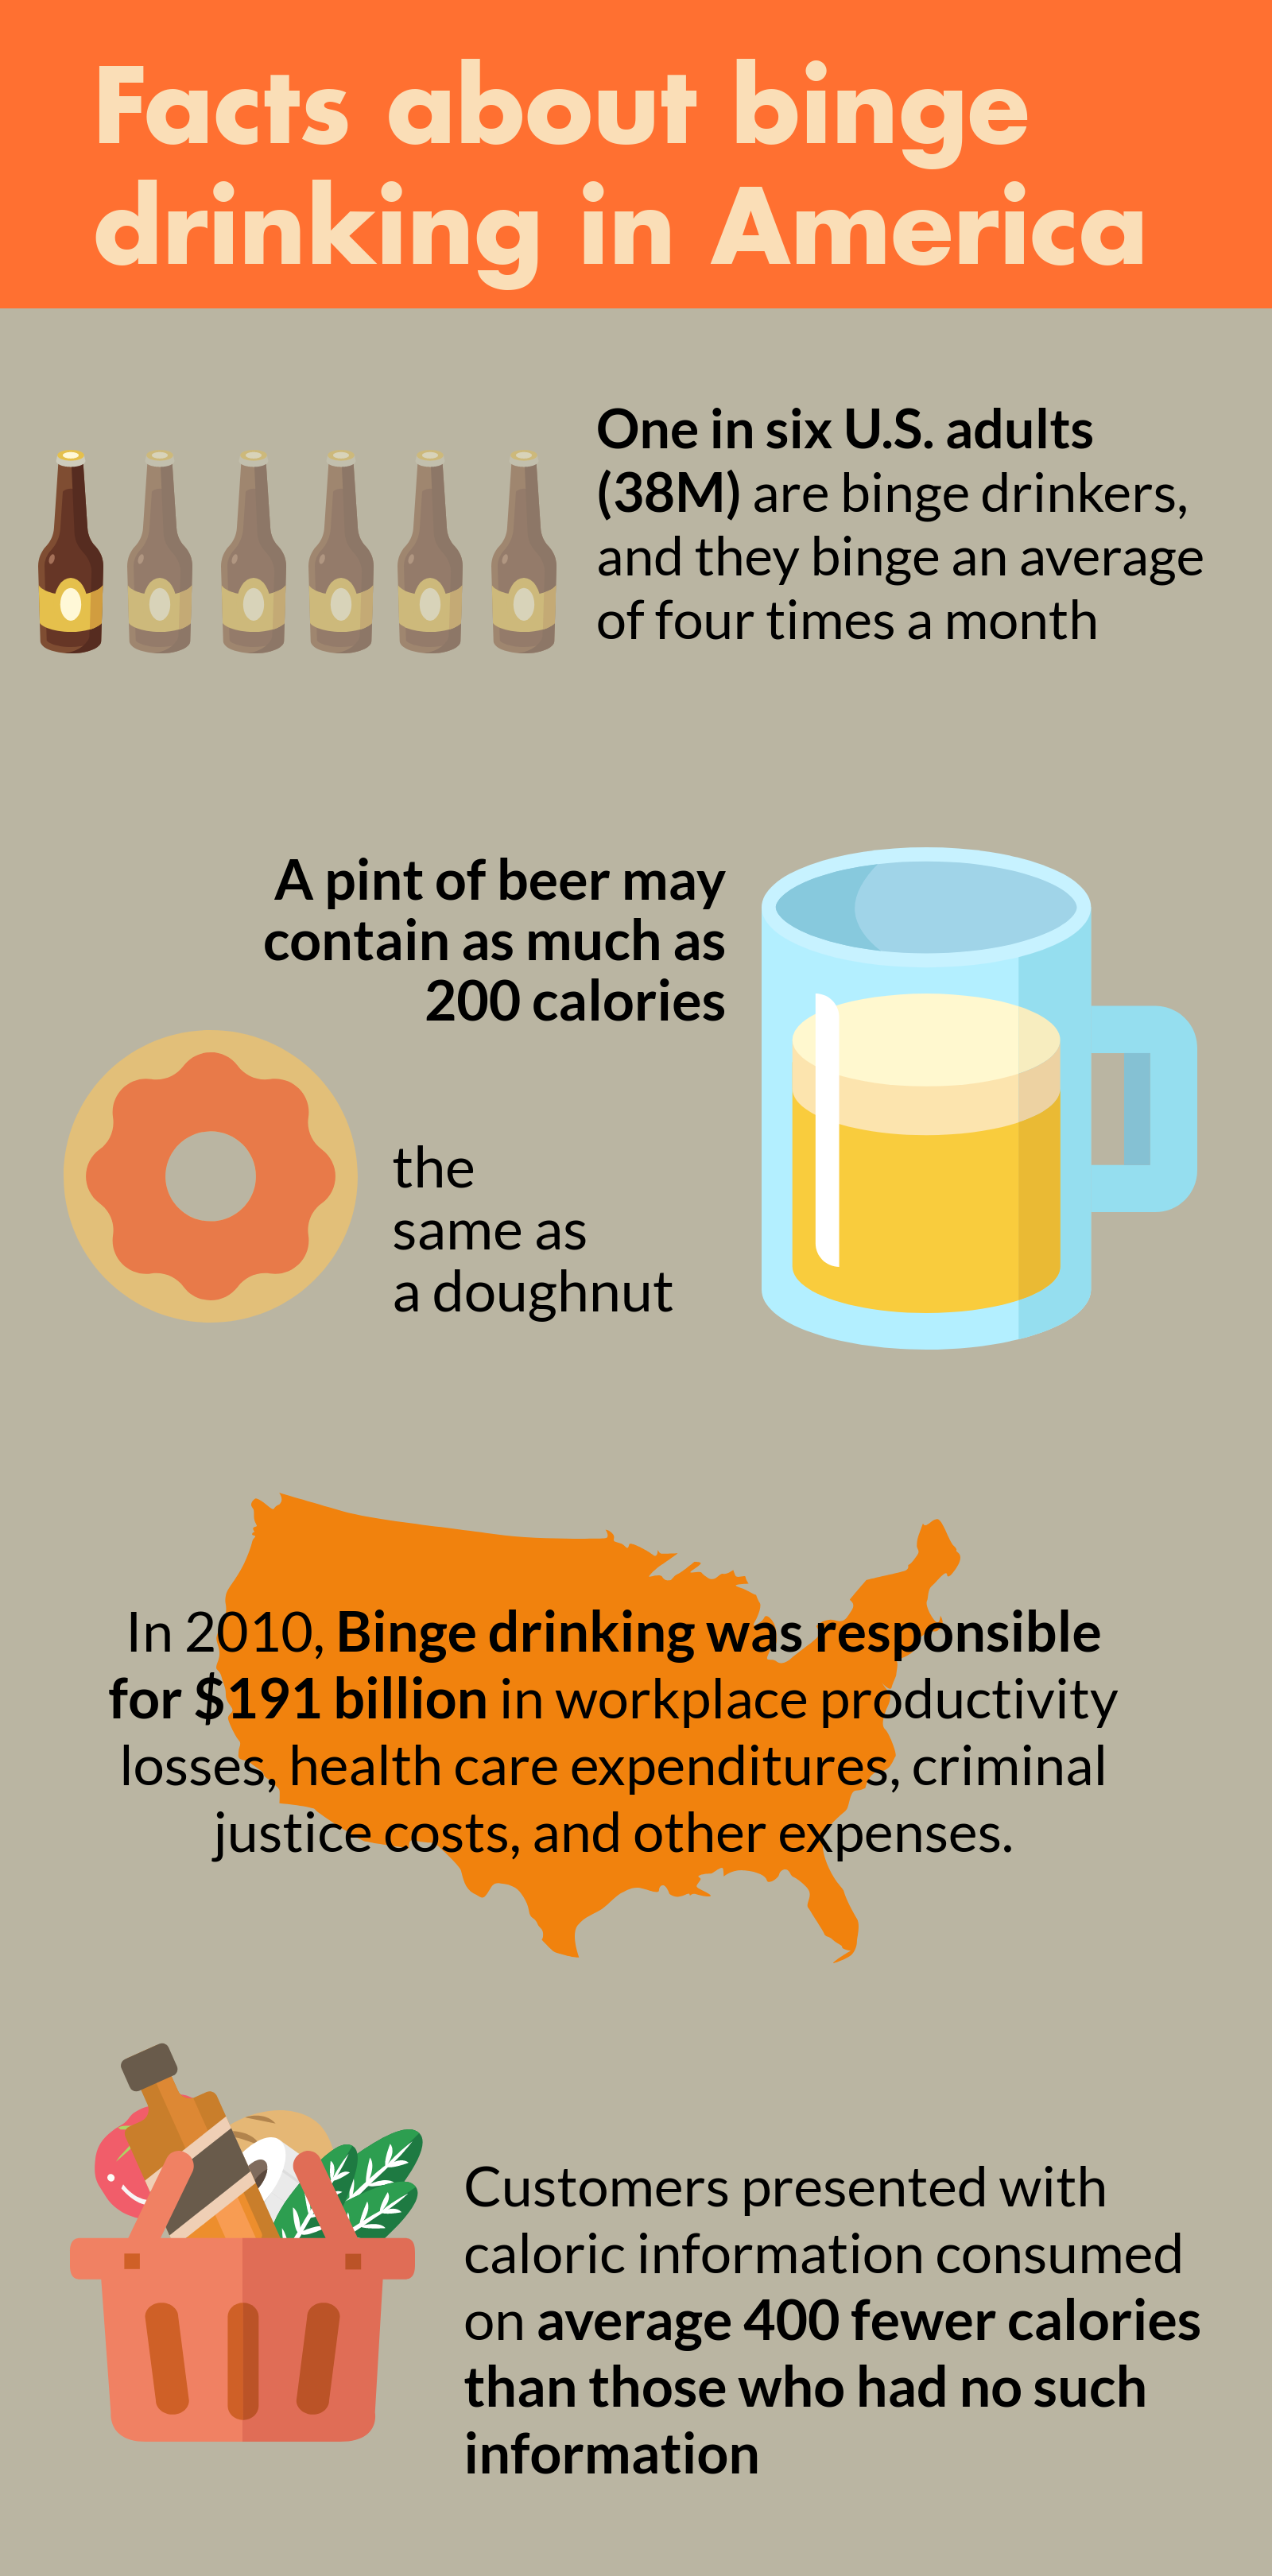 Alcohol Facts  Alcoholic Beverage Control